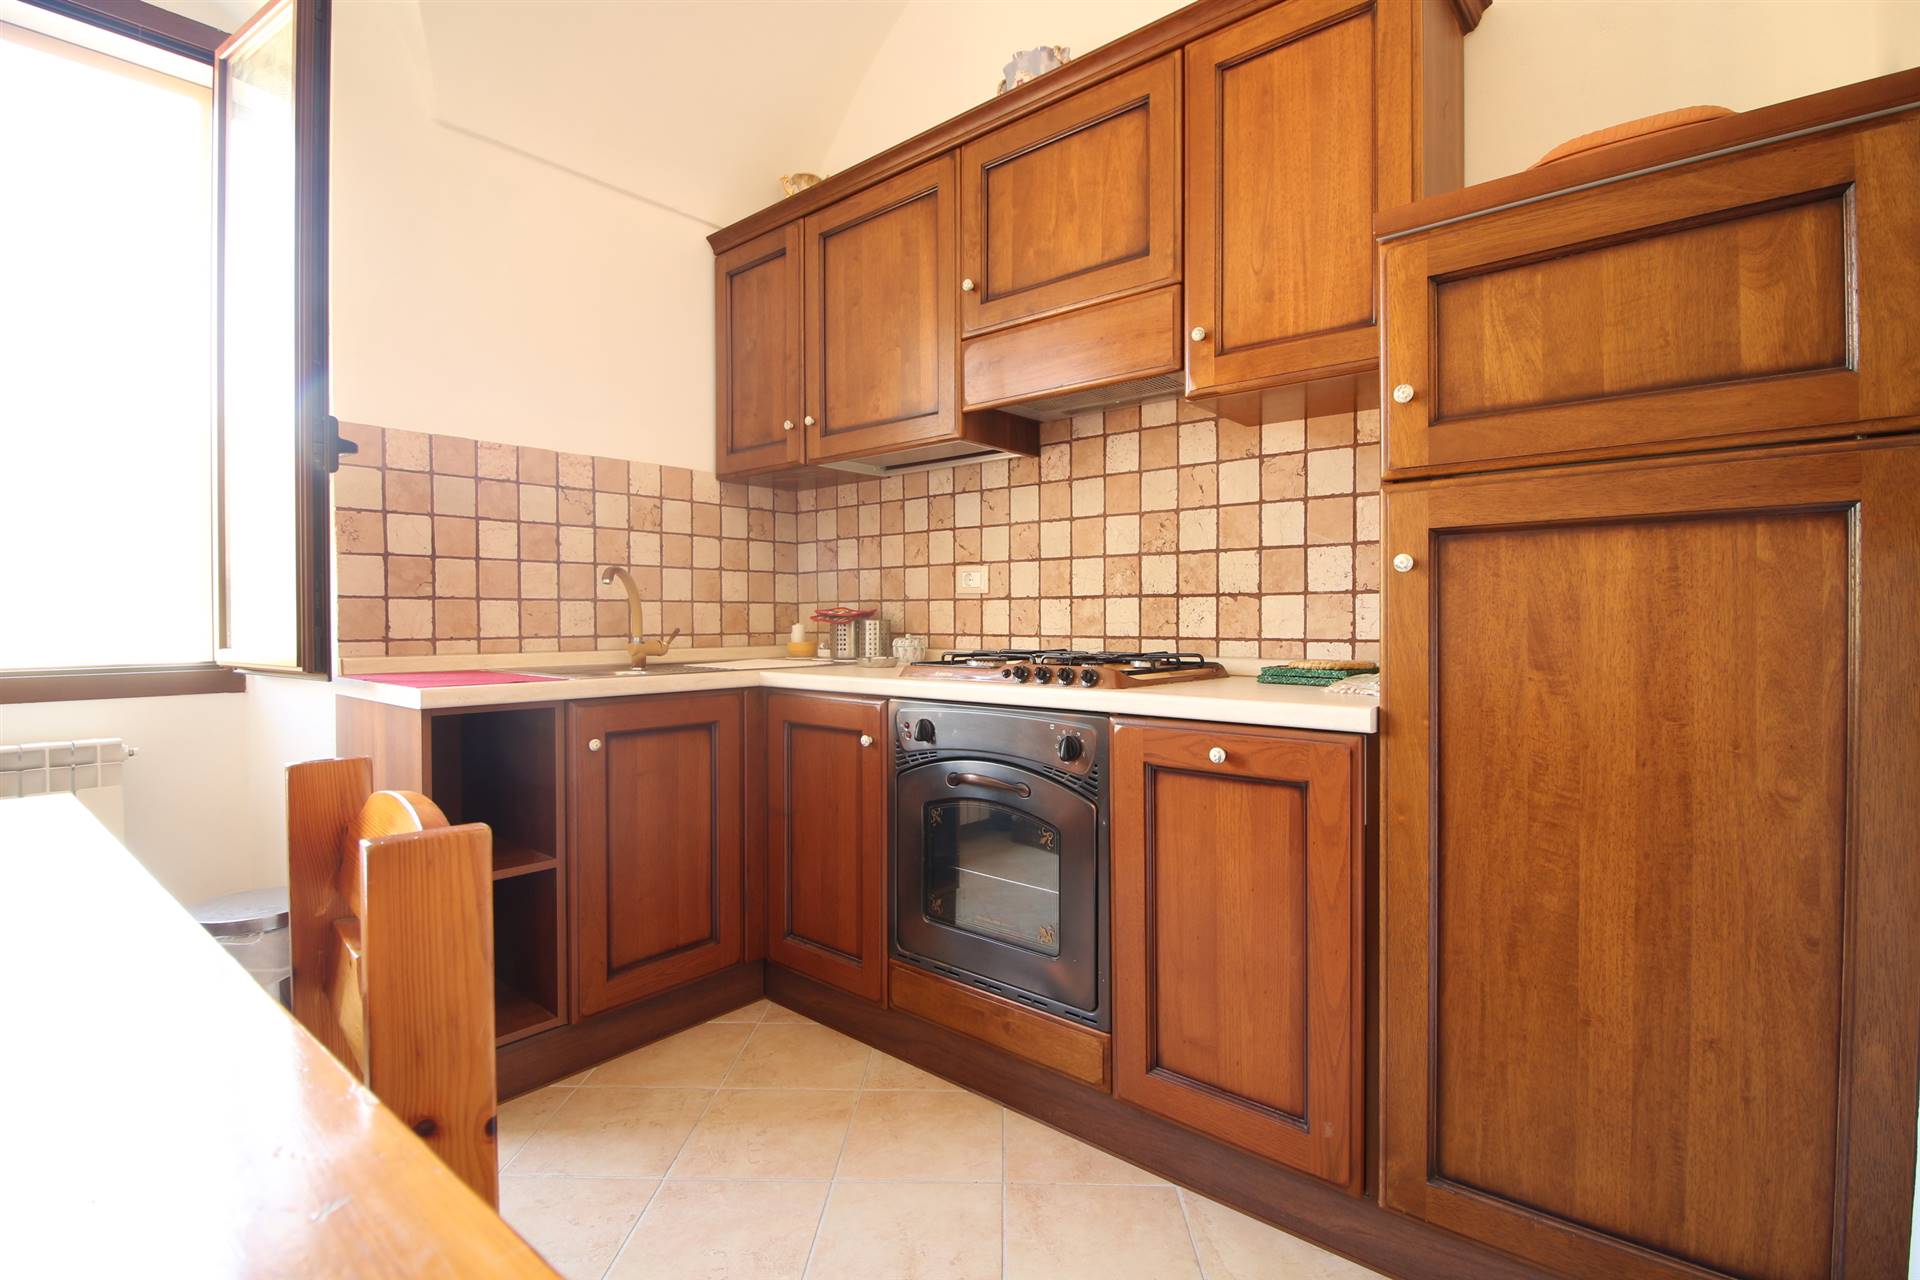 VENTIMIGLIA, Apartment for sale of 65 Sq. mt., Restored, Heating Individual heating system, Energetic class: G, placed at 1°, composed by: 3 Rooms, 